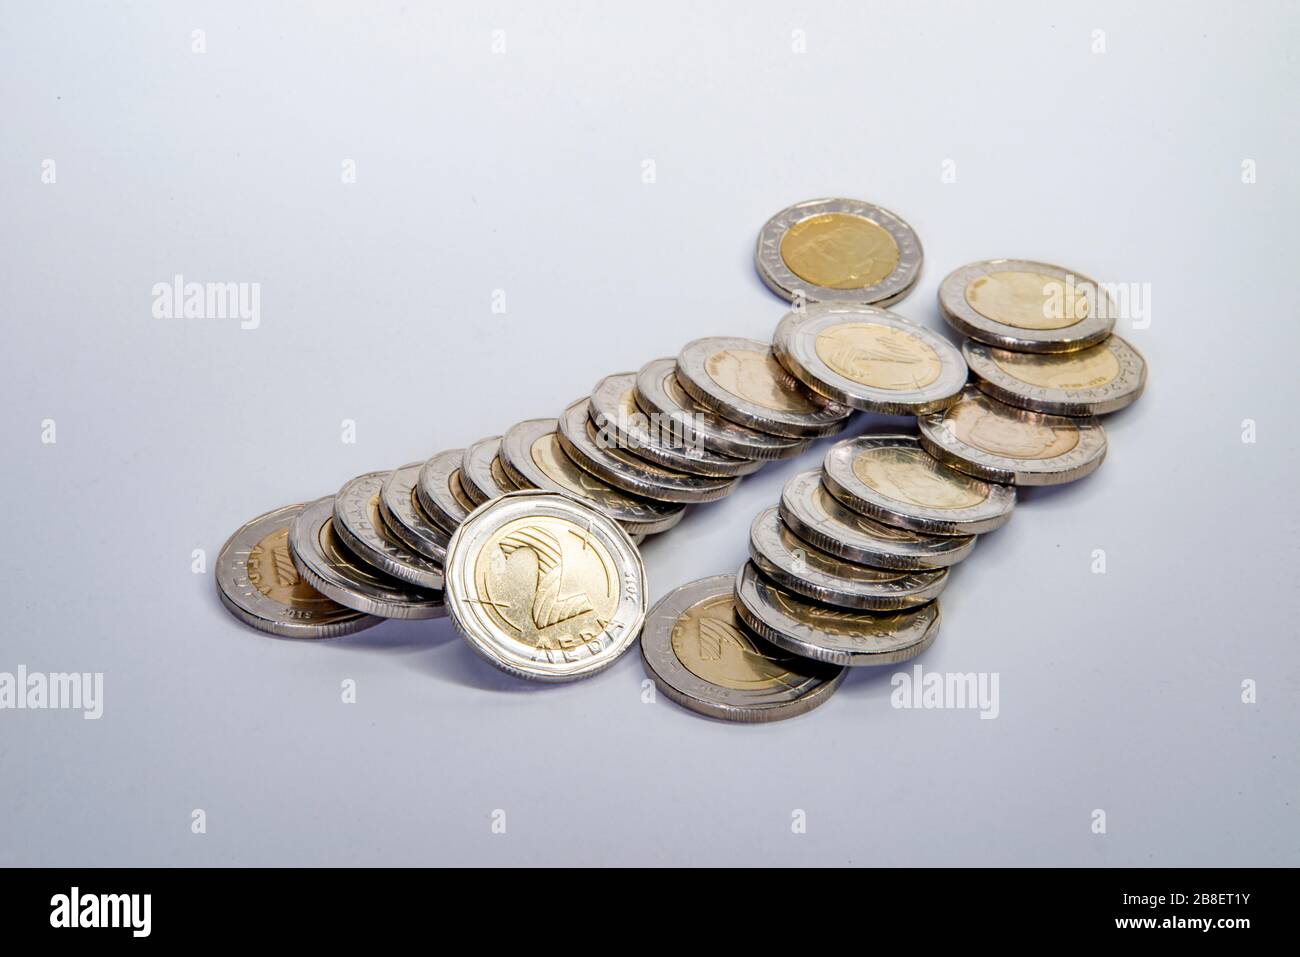 Pile of 2 BGN (Bulgarian lev) coins Stock Photo